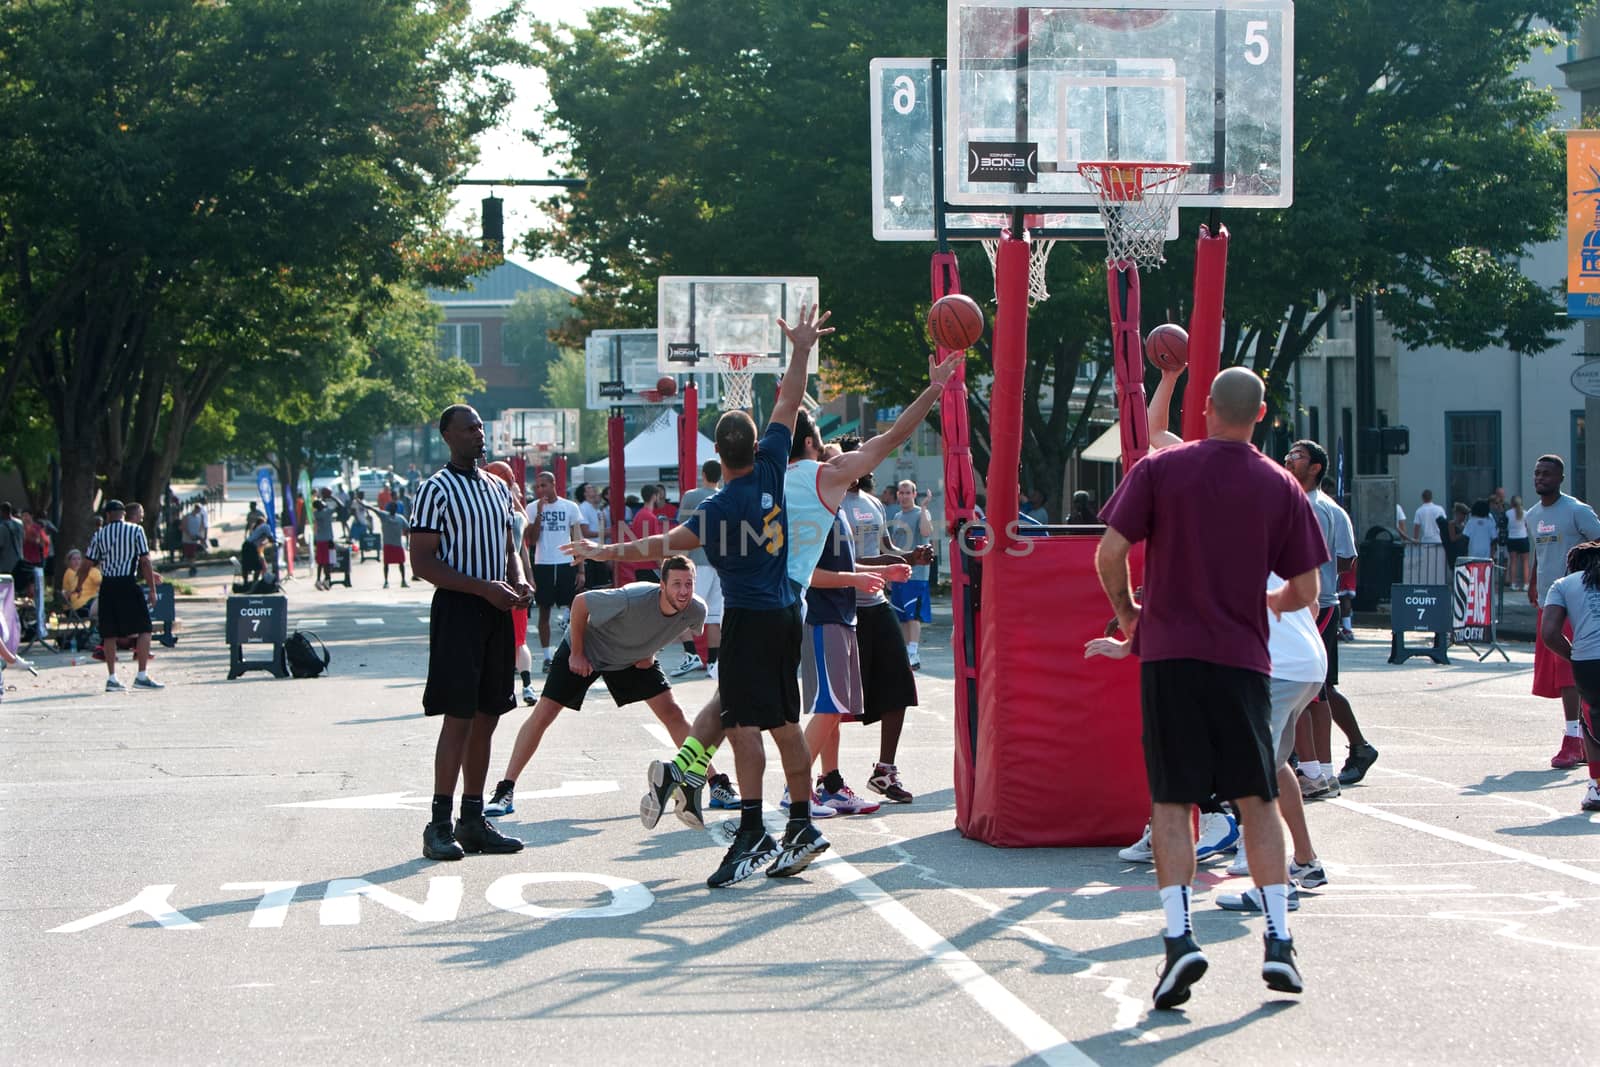 Man Drives And Shoots Layup In Street Basketball Tournament by BluIz60